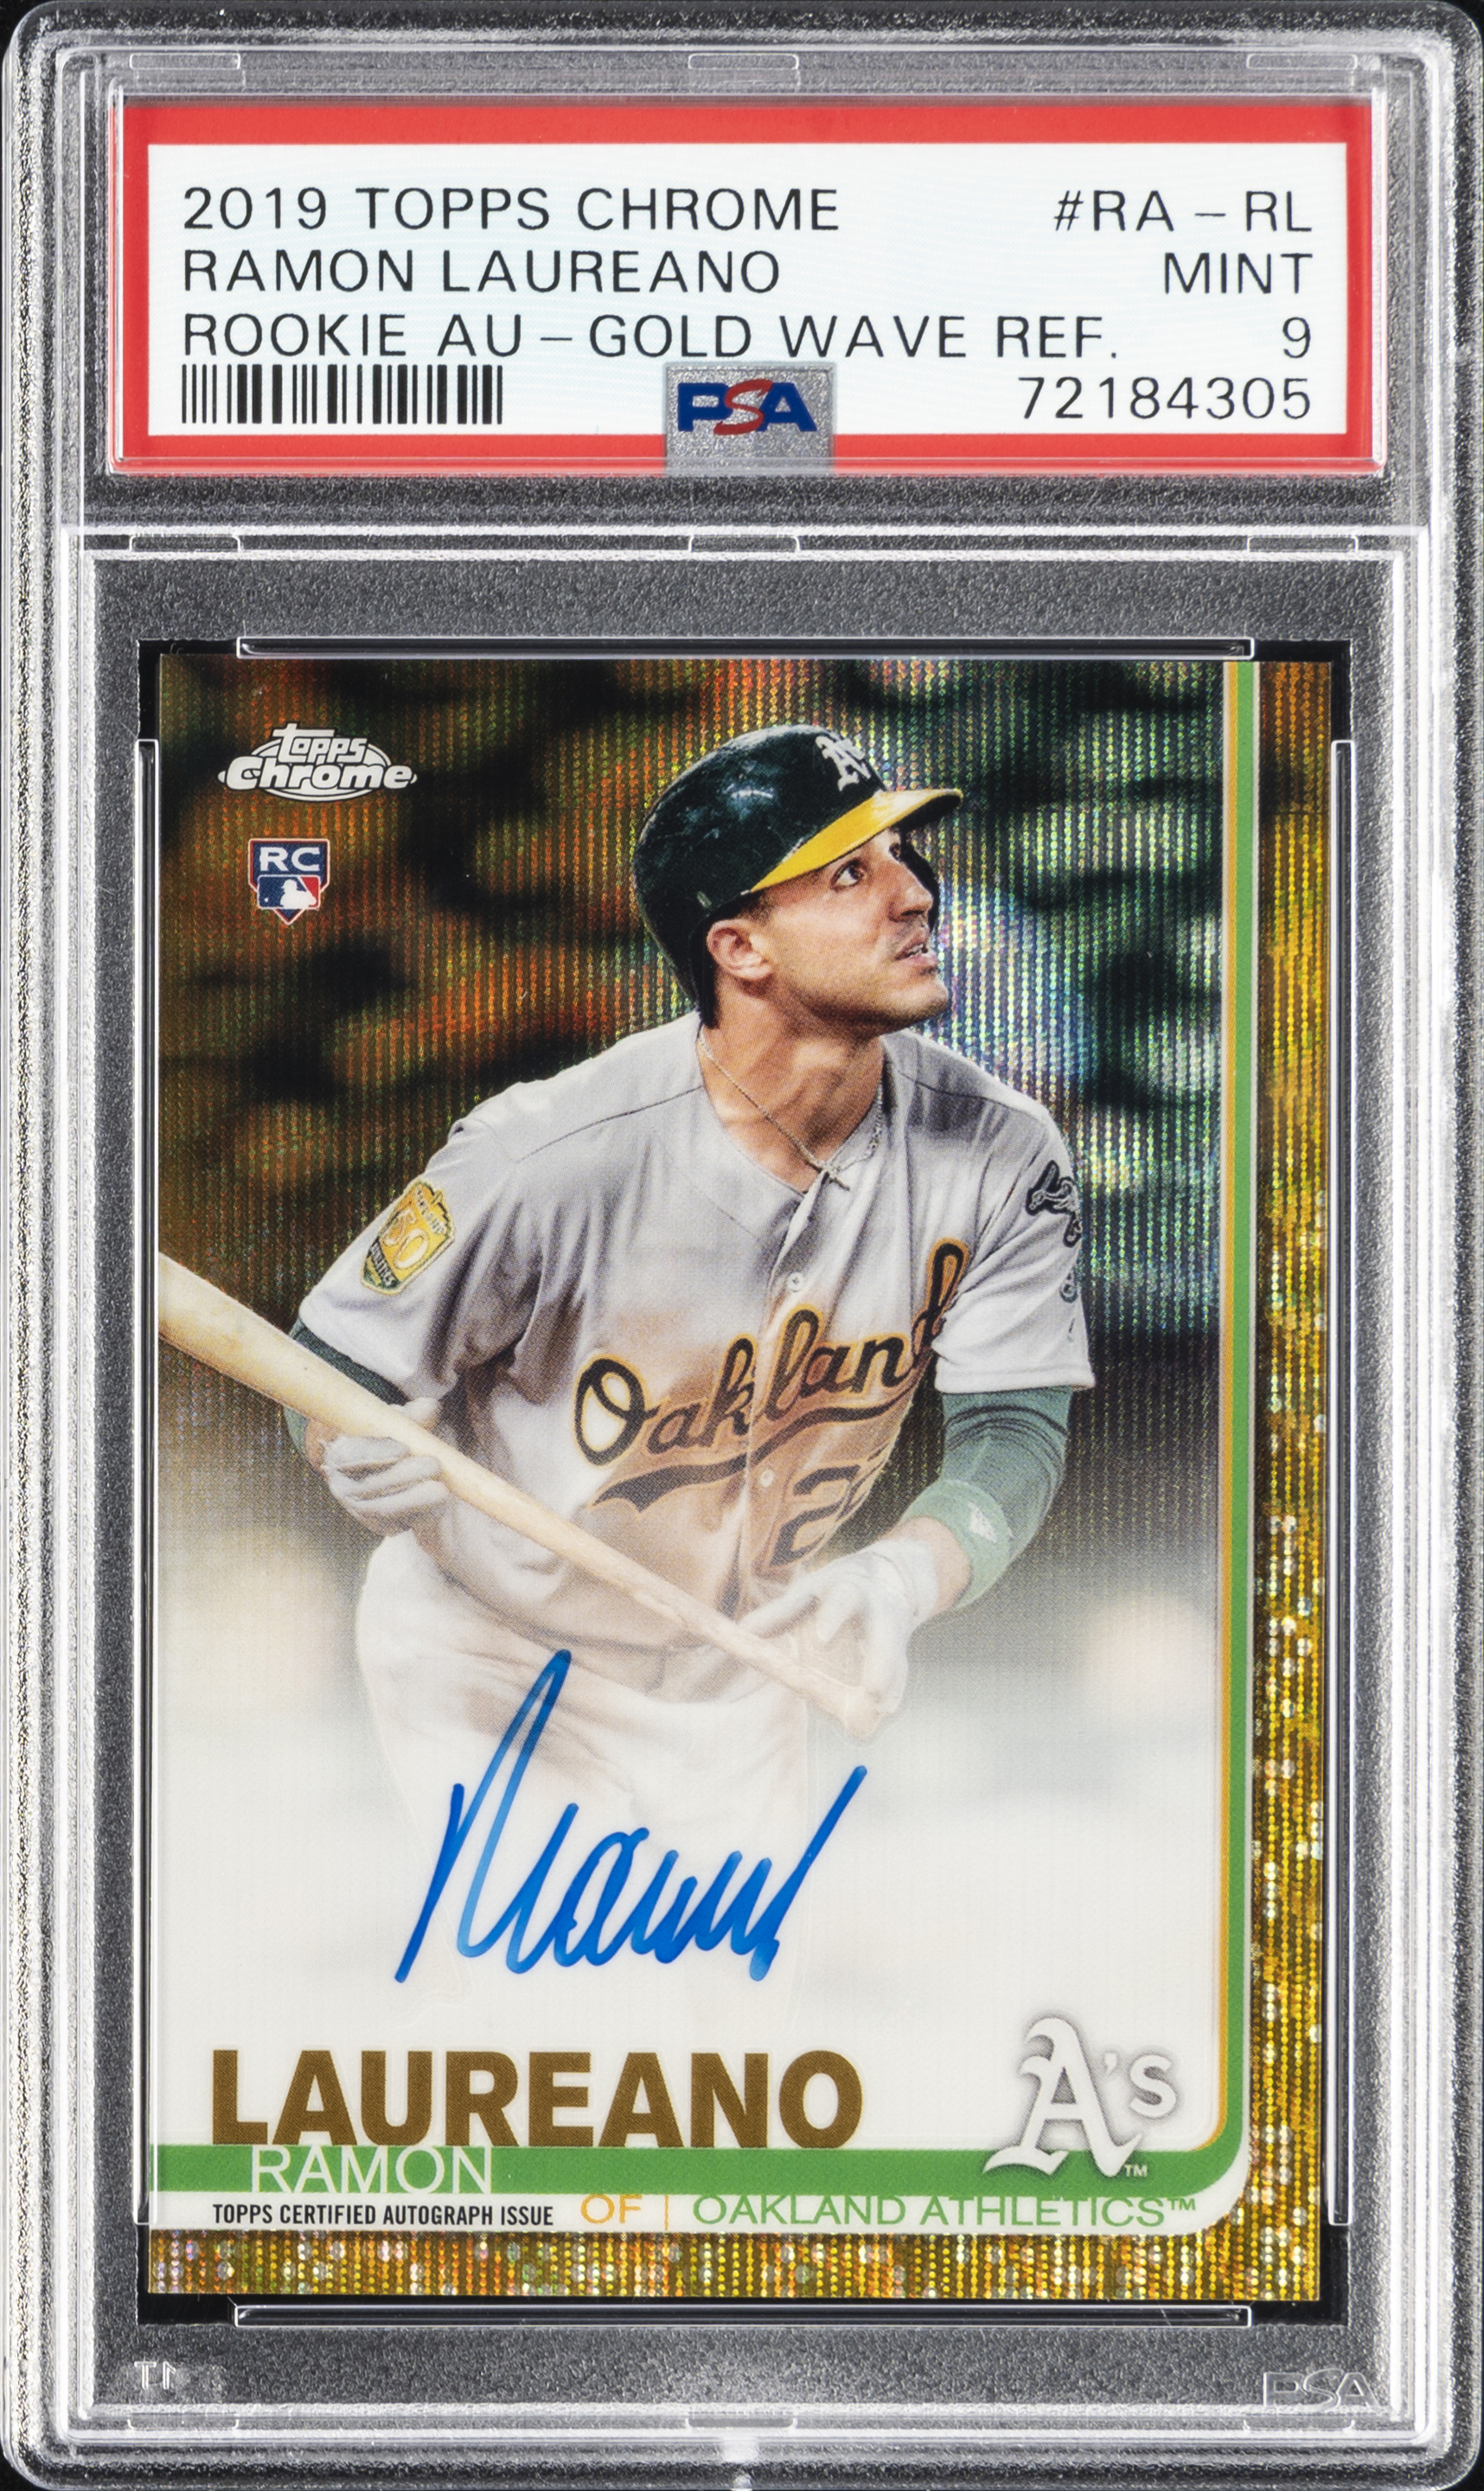 2019 Topps Chrome Rookie Autographs Gold Wave Refractor #RA-RL Ramon Laureano Signed Rookie Card (#16/50) – PSA MINT 9